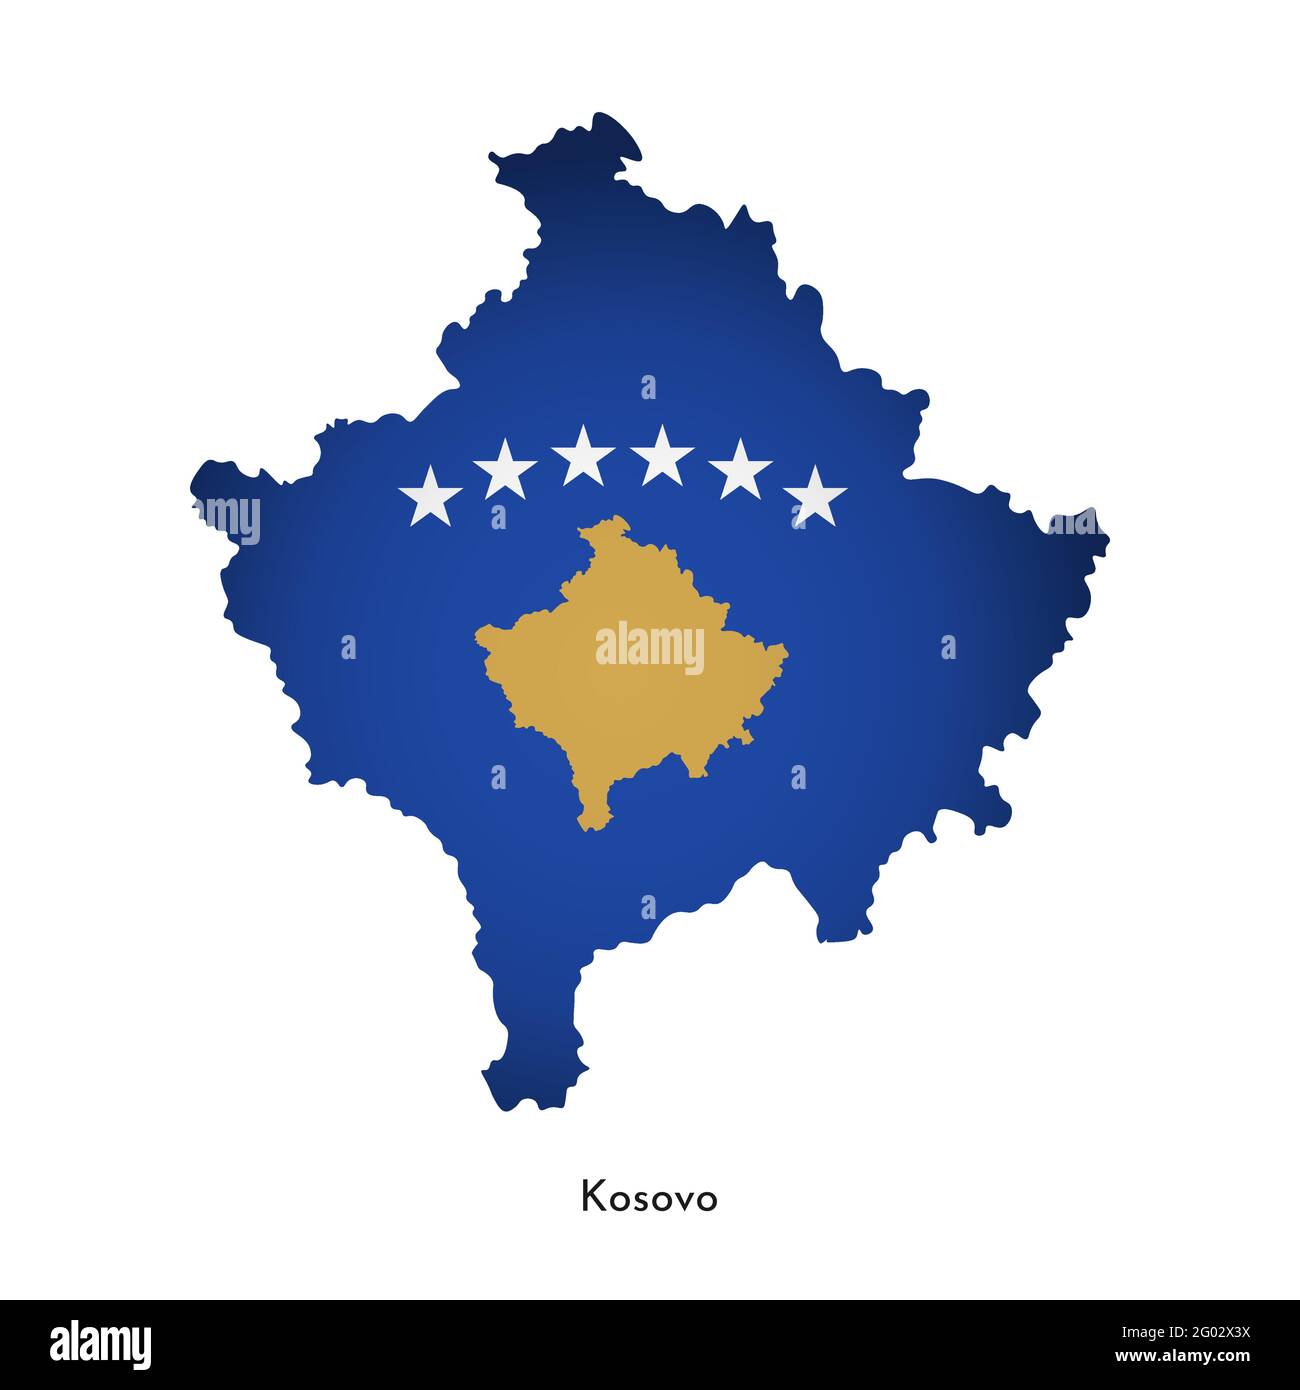 Vector illustration with Kosovo national flag with shape of this map (simplified). Volume shadow on the map. Stock Vector